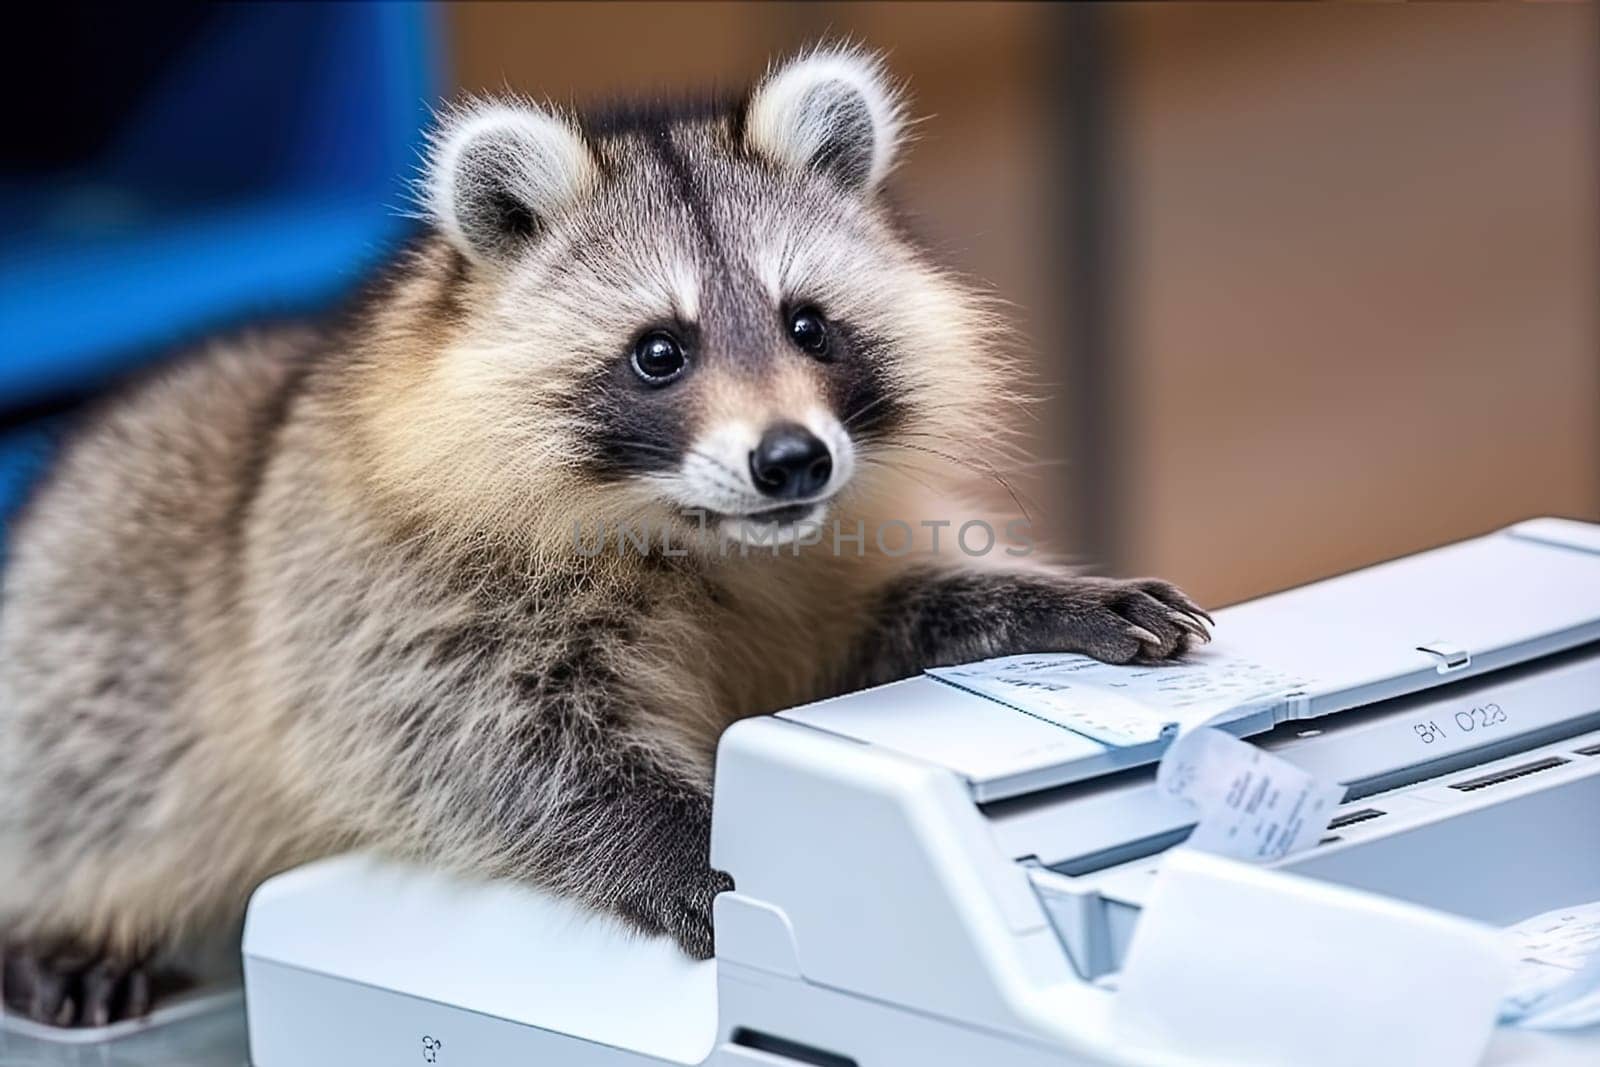 A raccoon in the office printing a photo on a printer. Generative Artificial Intelligence. High quality illustration